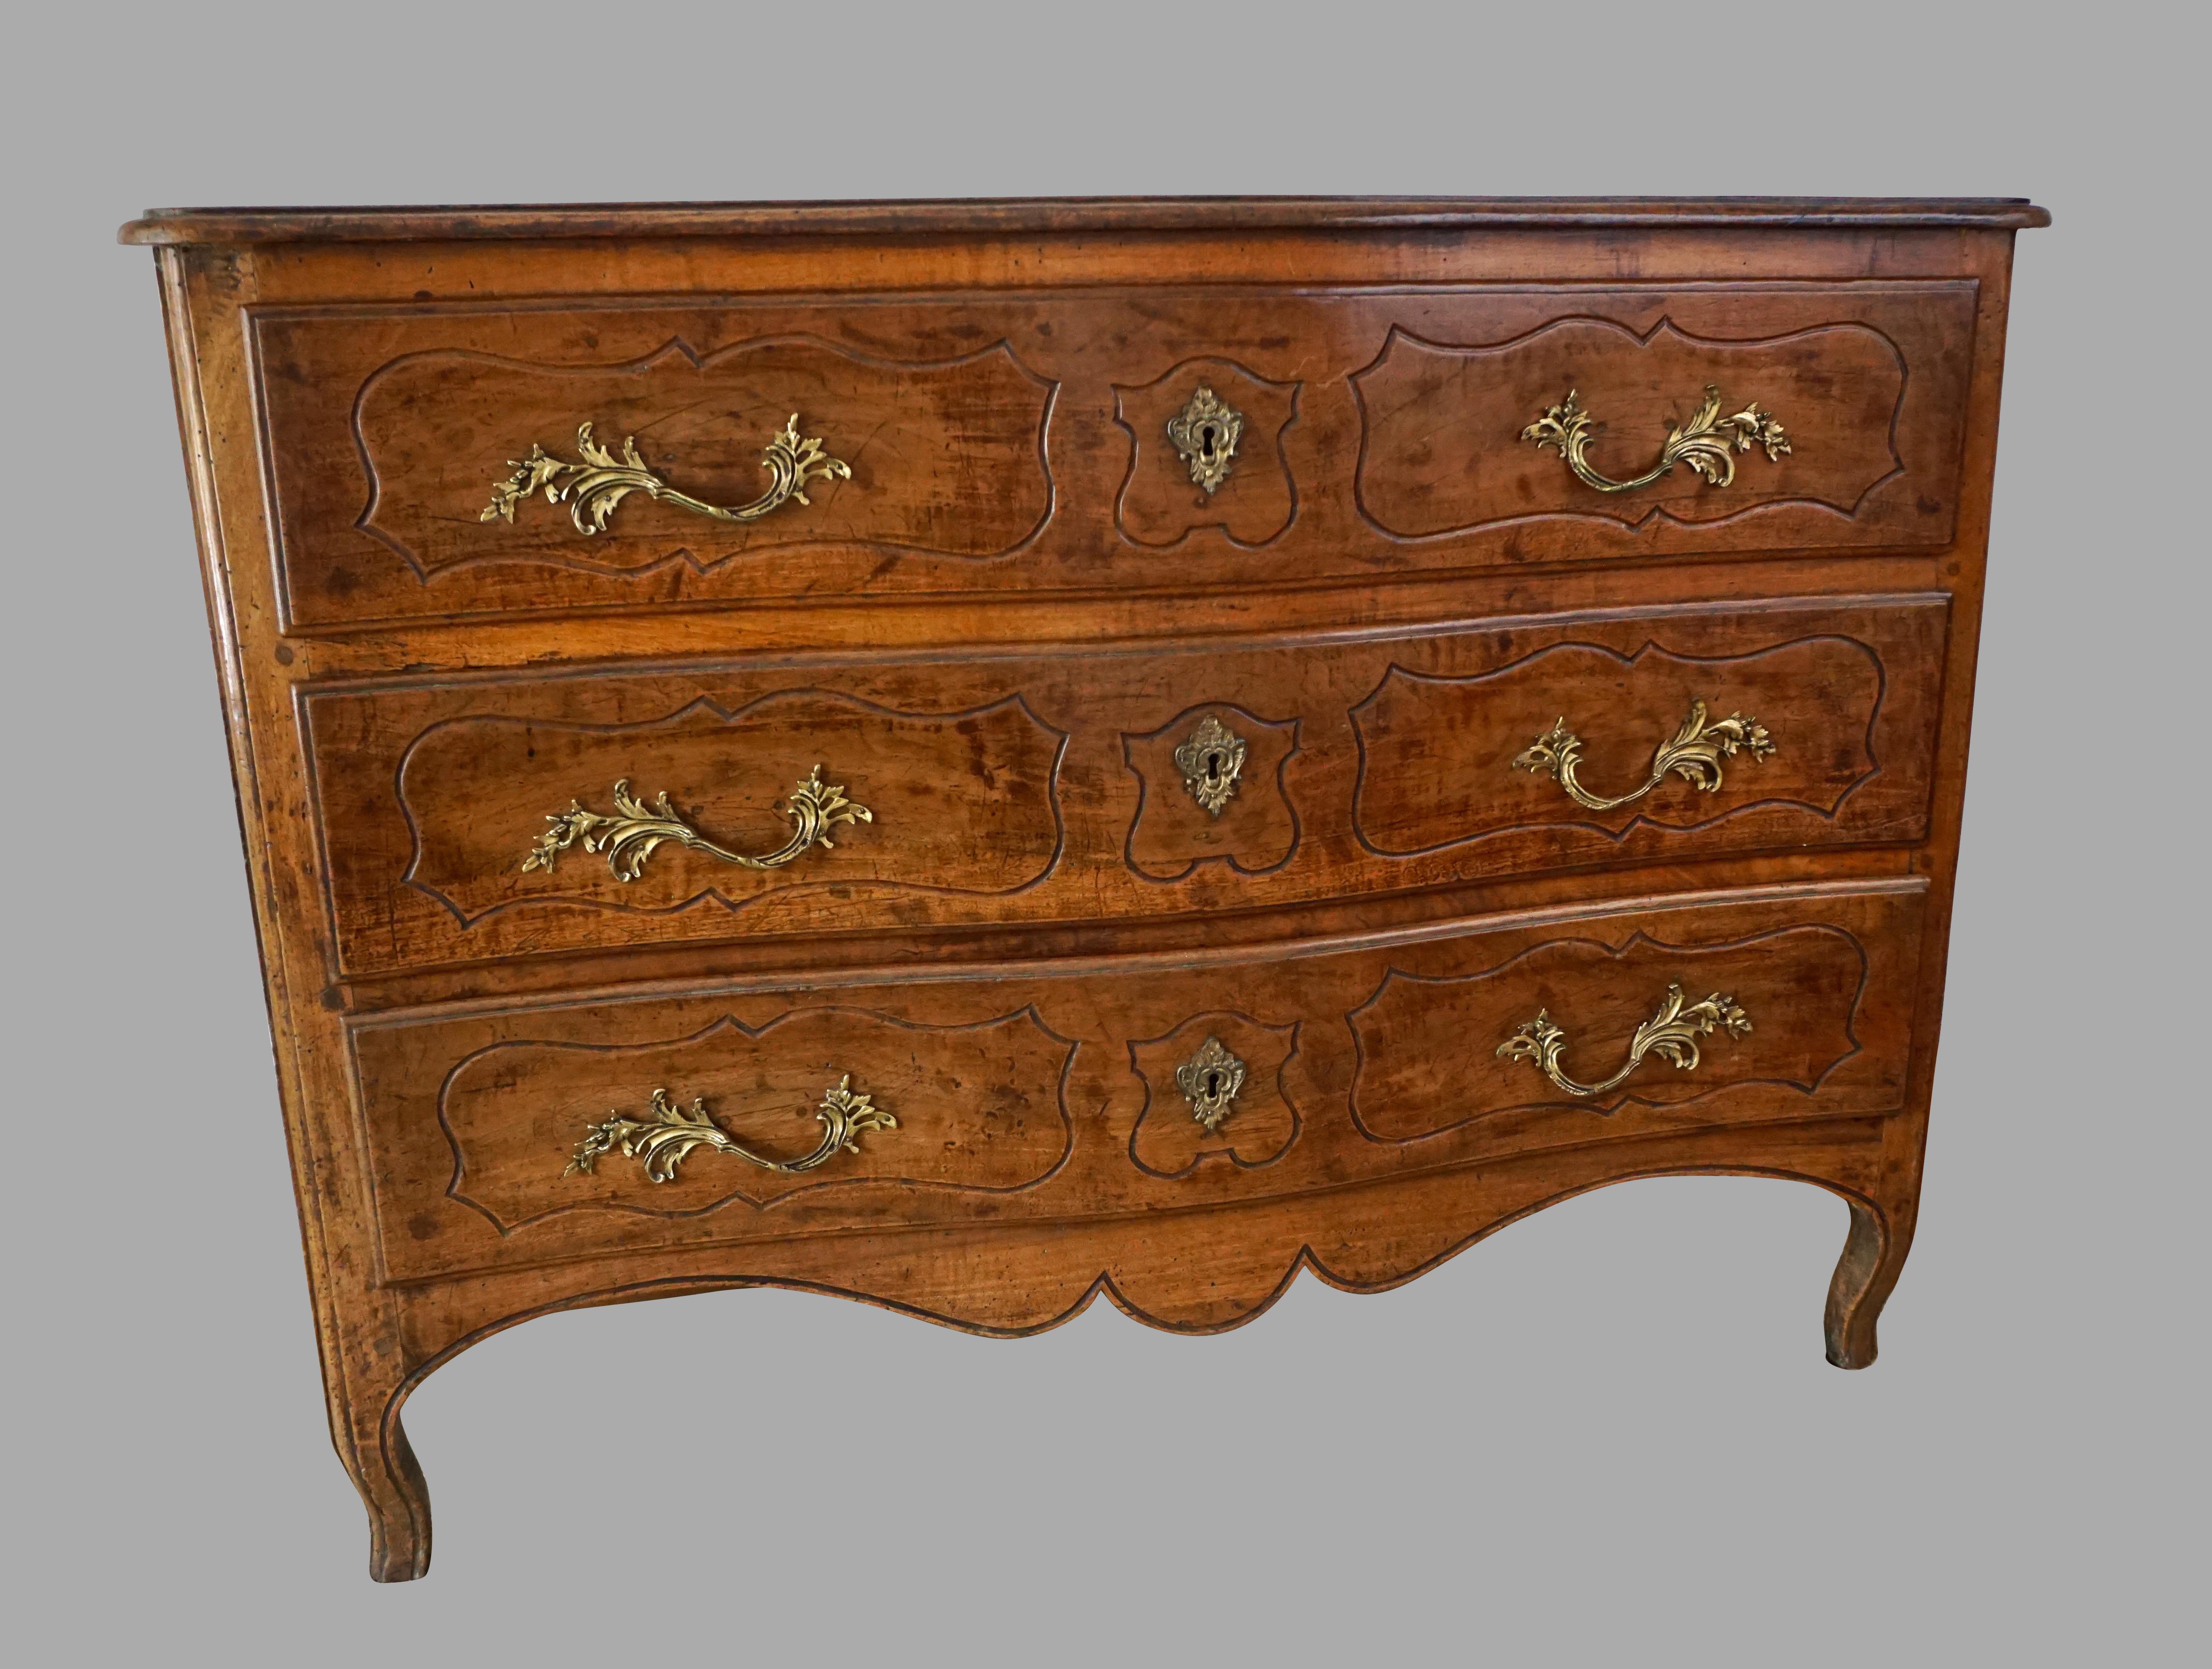 A French Louis XV period provincial 3 drawer walnut serpentine commode, the top with a molded edge above 3 drawers, each with incised paneled decoration, the paneled sides similarly decorated, the base with a shaped apron, all resting on short